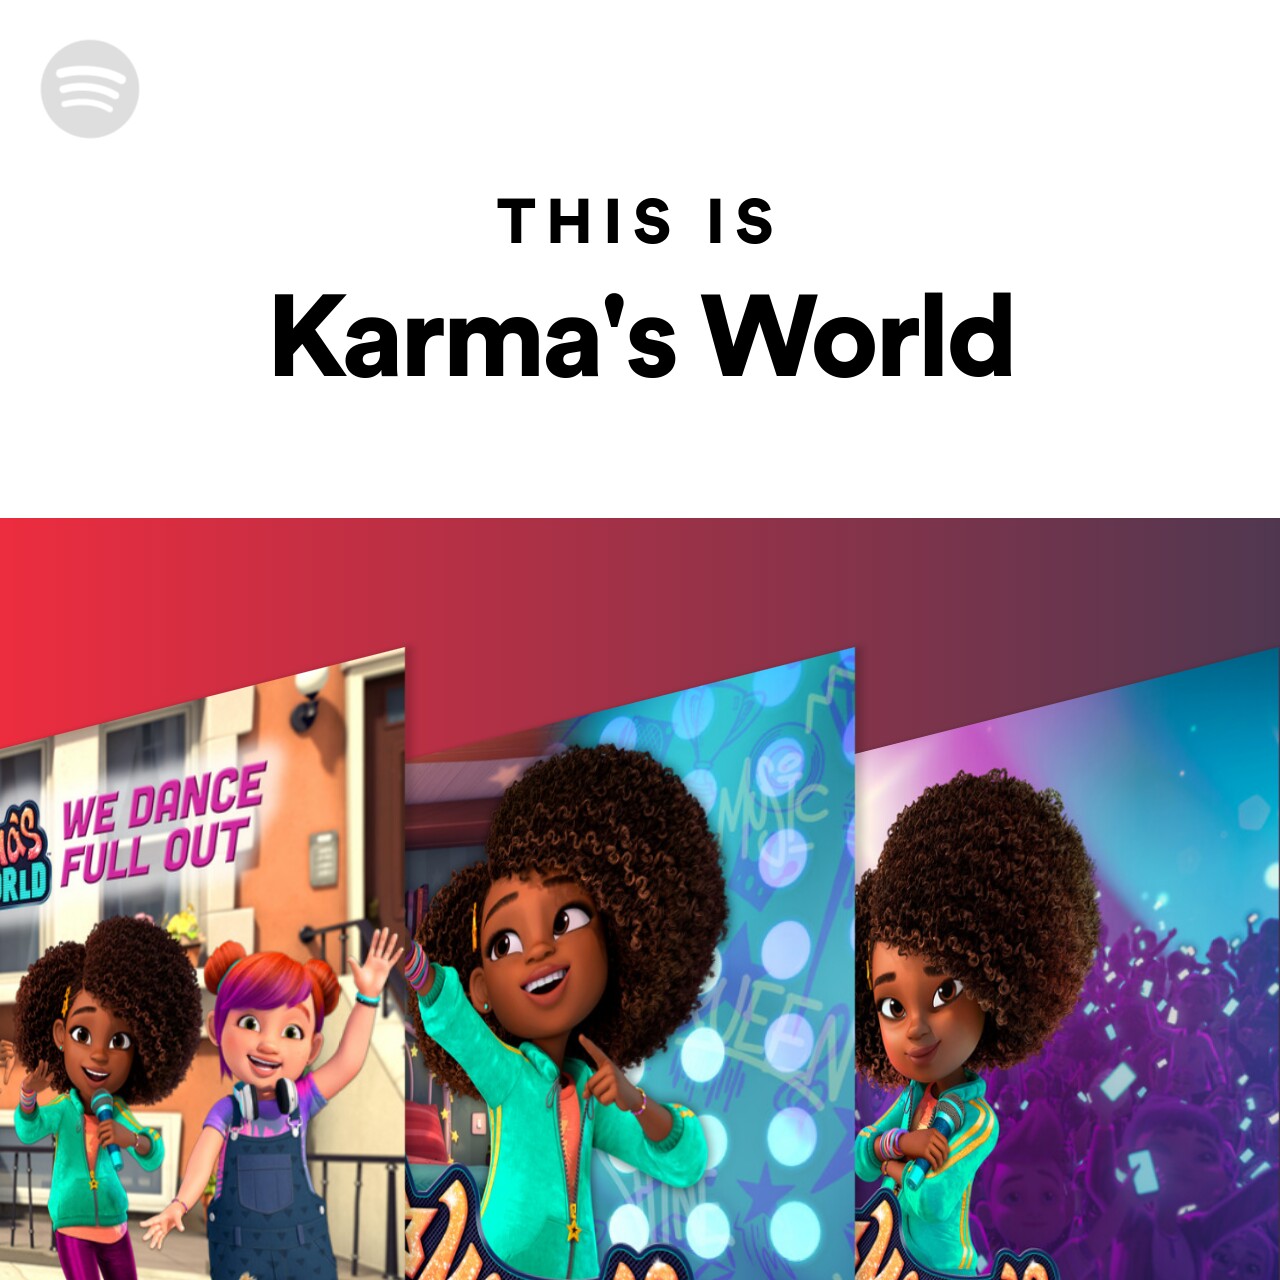 This Is Karma's World